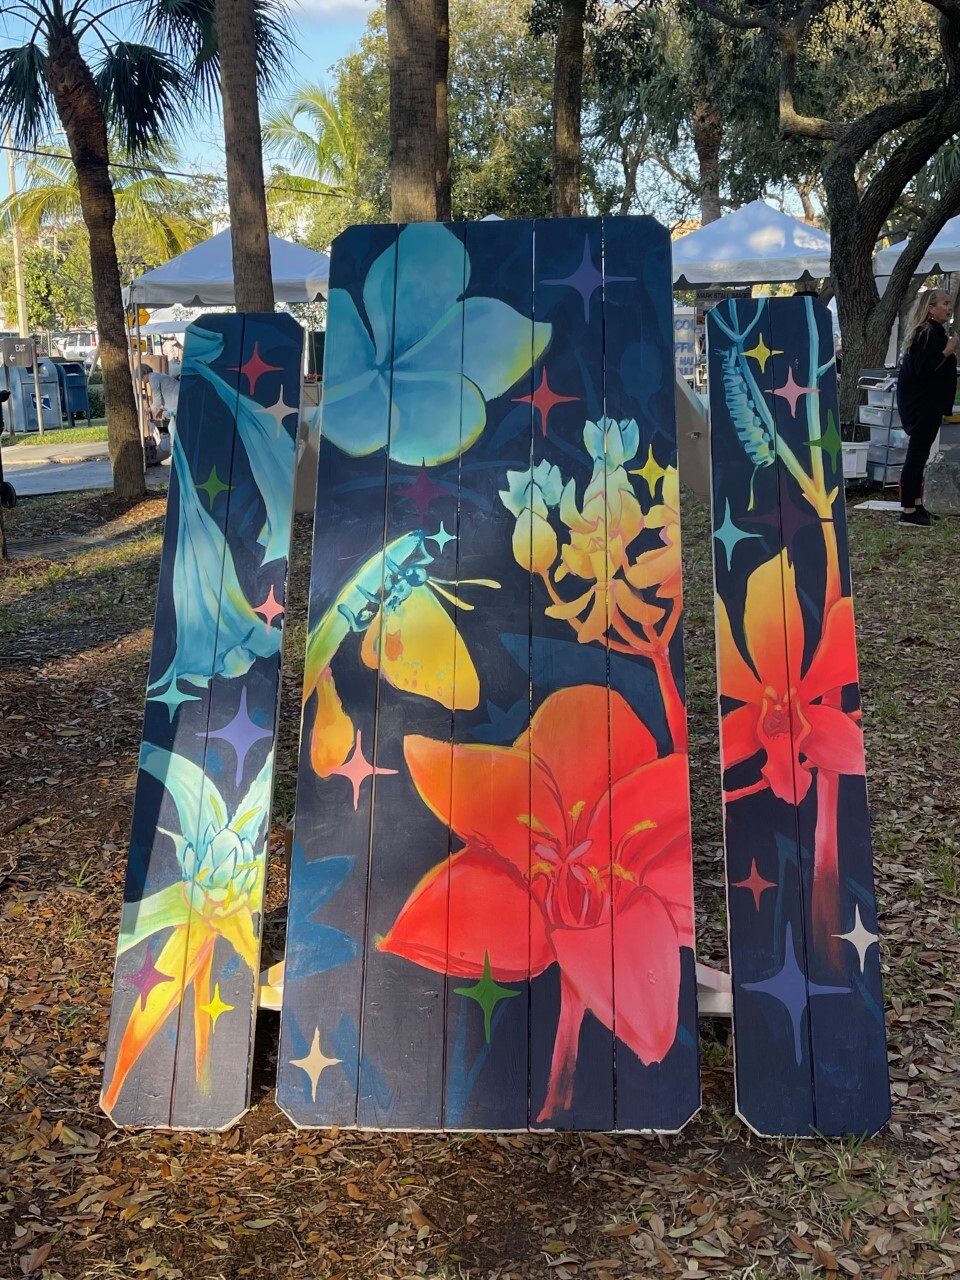 ArtsFest Picnic Table Mural by Gregory Dirr